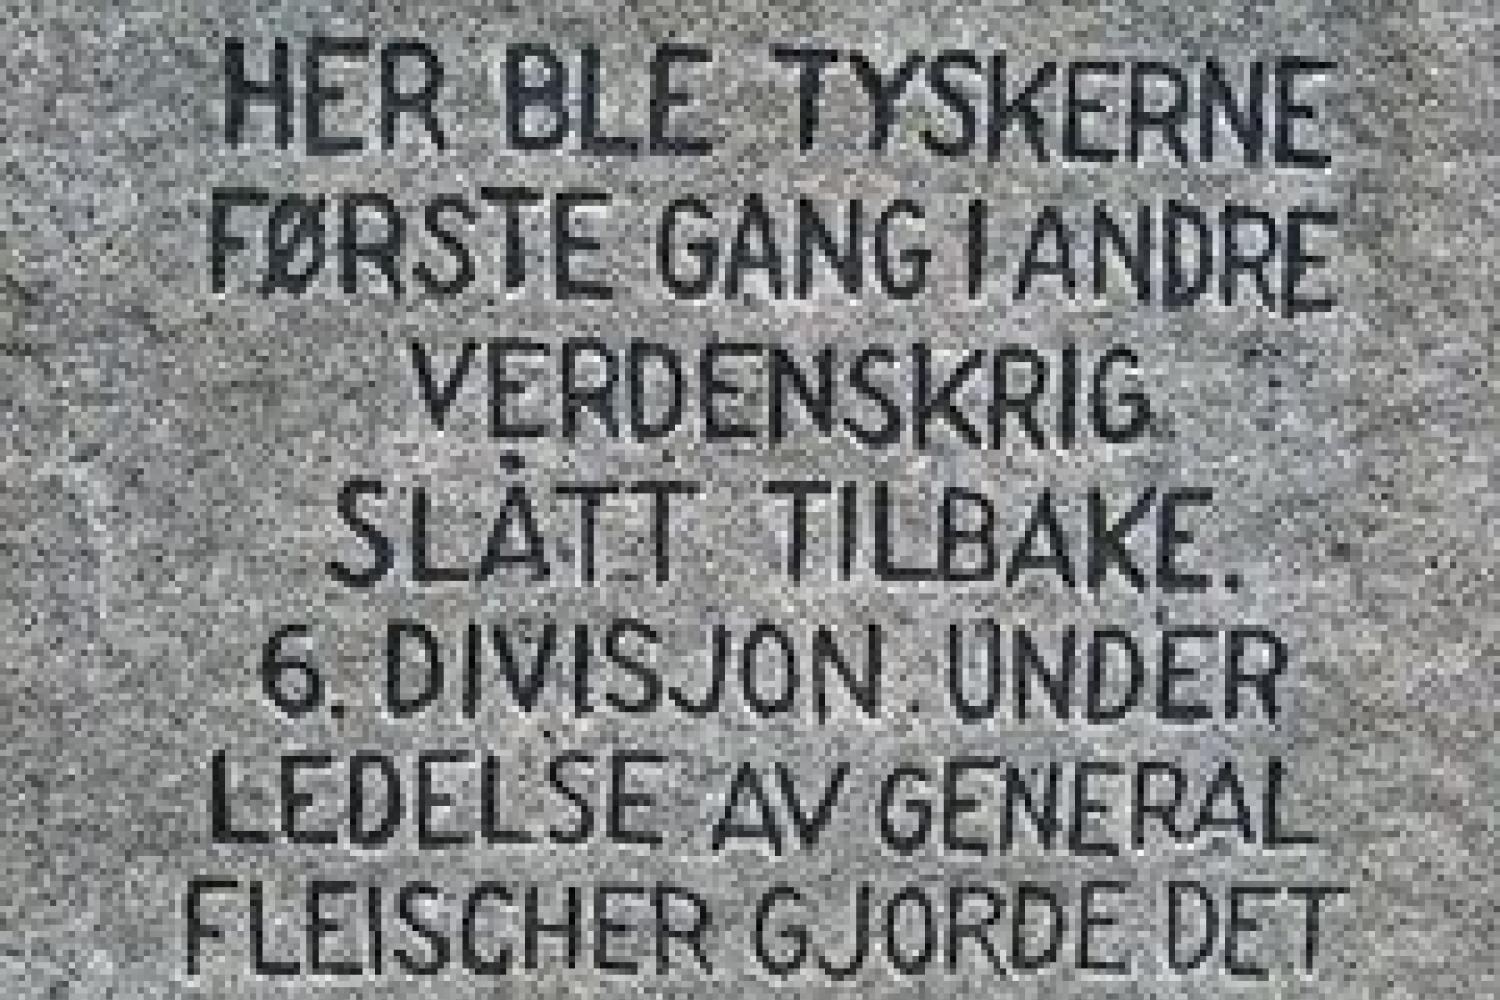 Inscription: "This is the place where the Germans experienced their first strike back. The 6th division led by General Fleischer did it" Foto: Turistkontoret i Bjerkvik